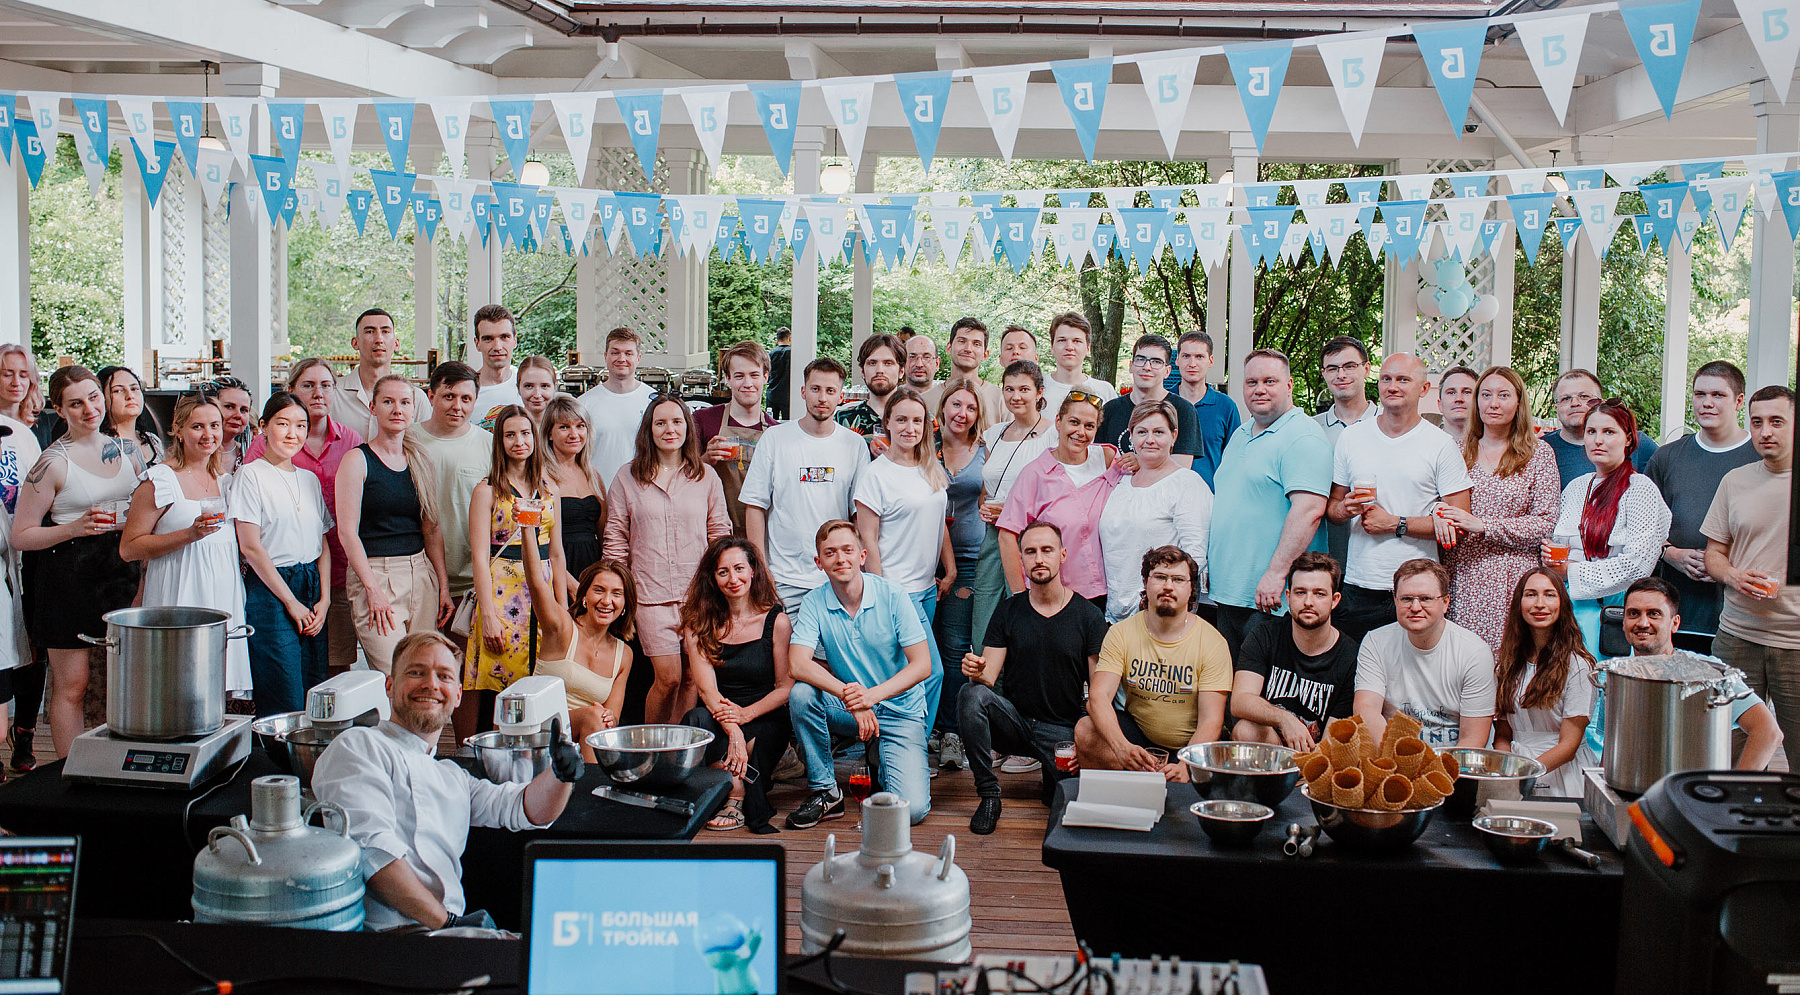 Big Three’s summer corporate event took place